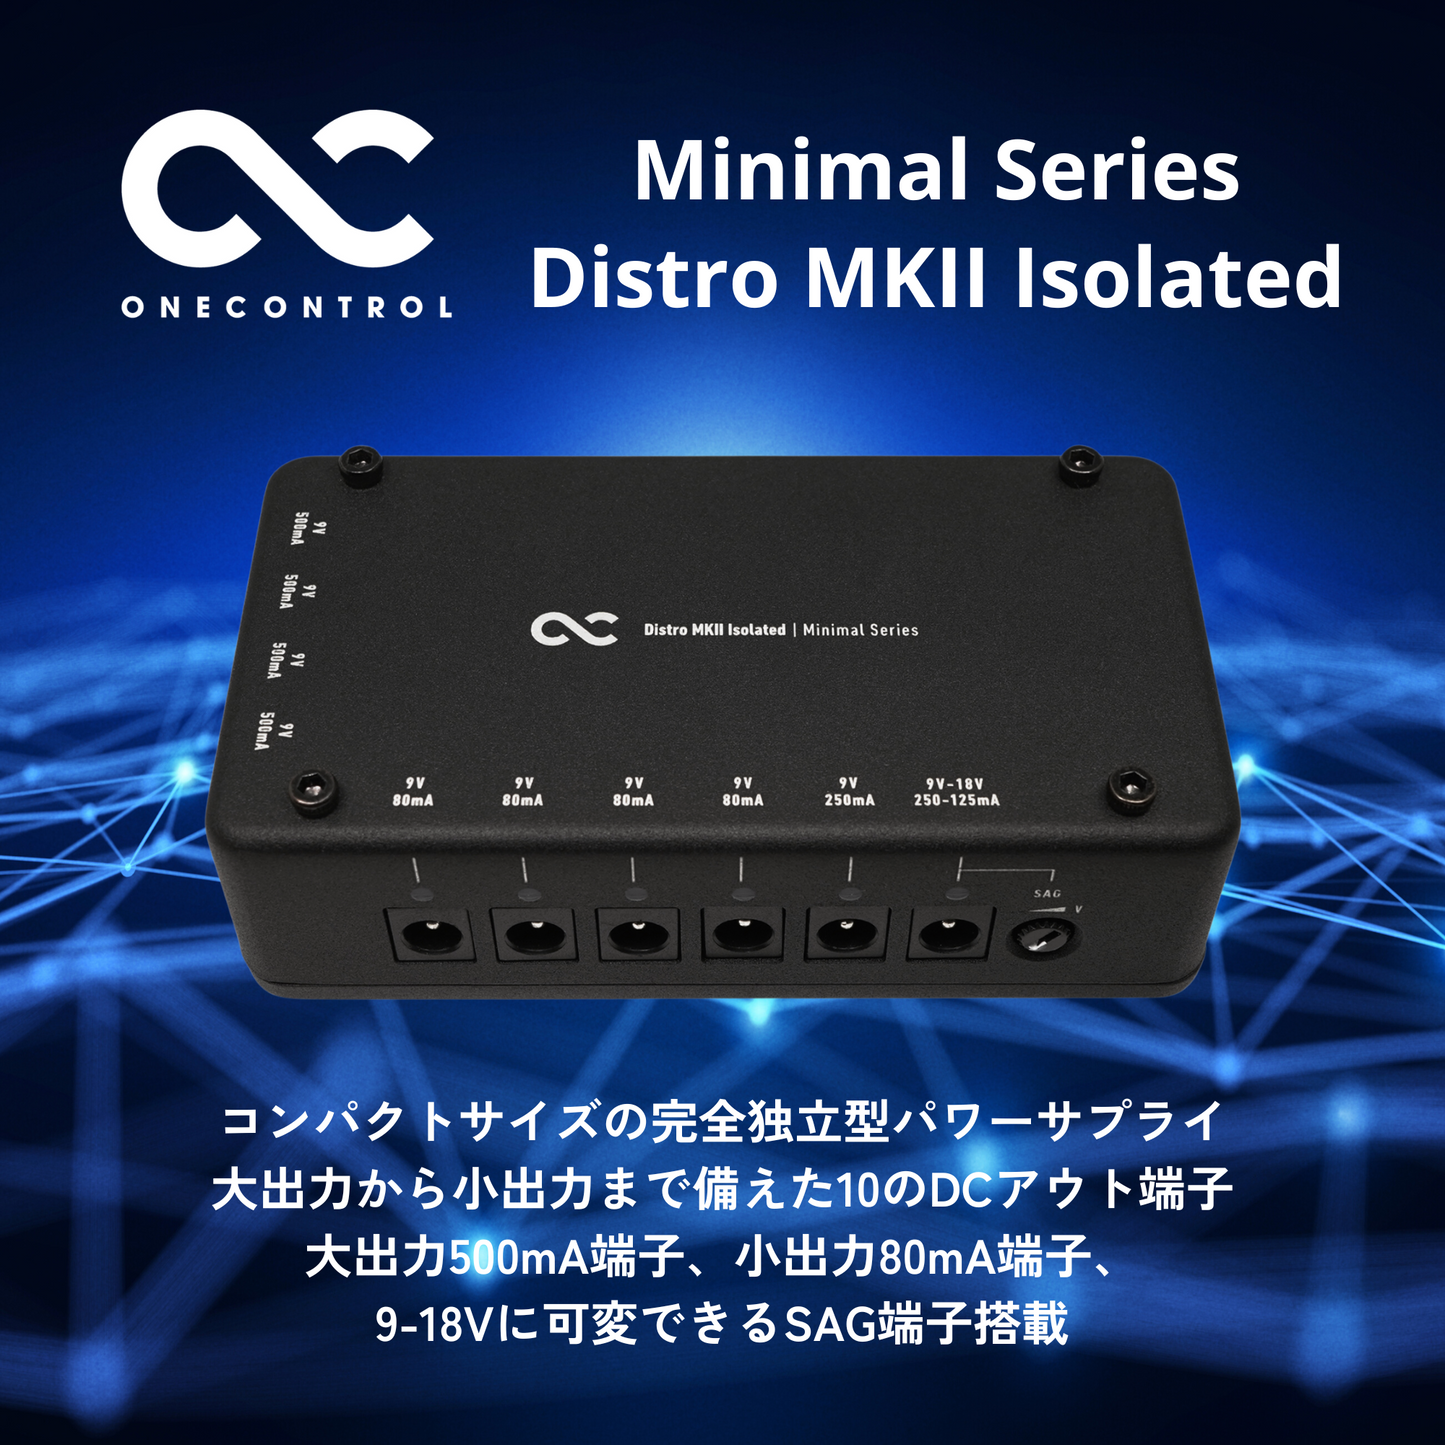 One Control/Minimal Series Distro MKII Isolated